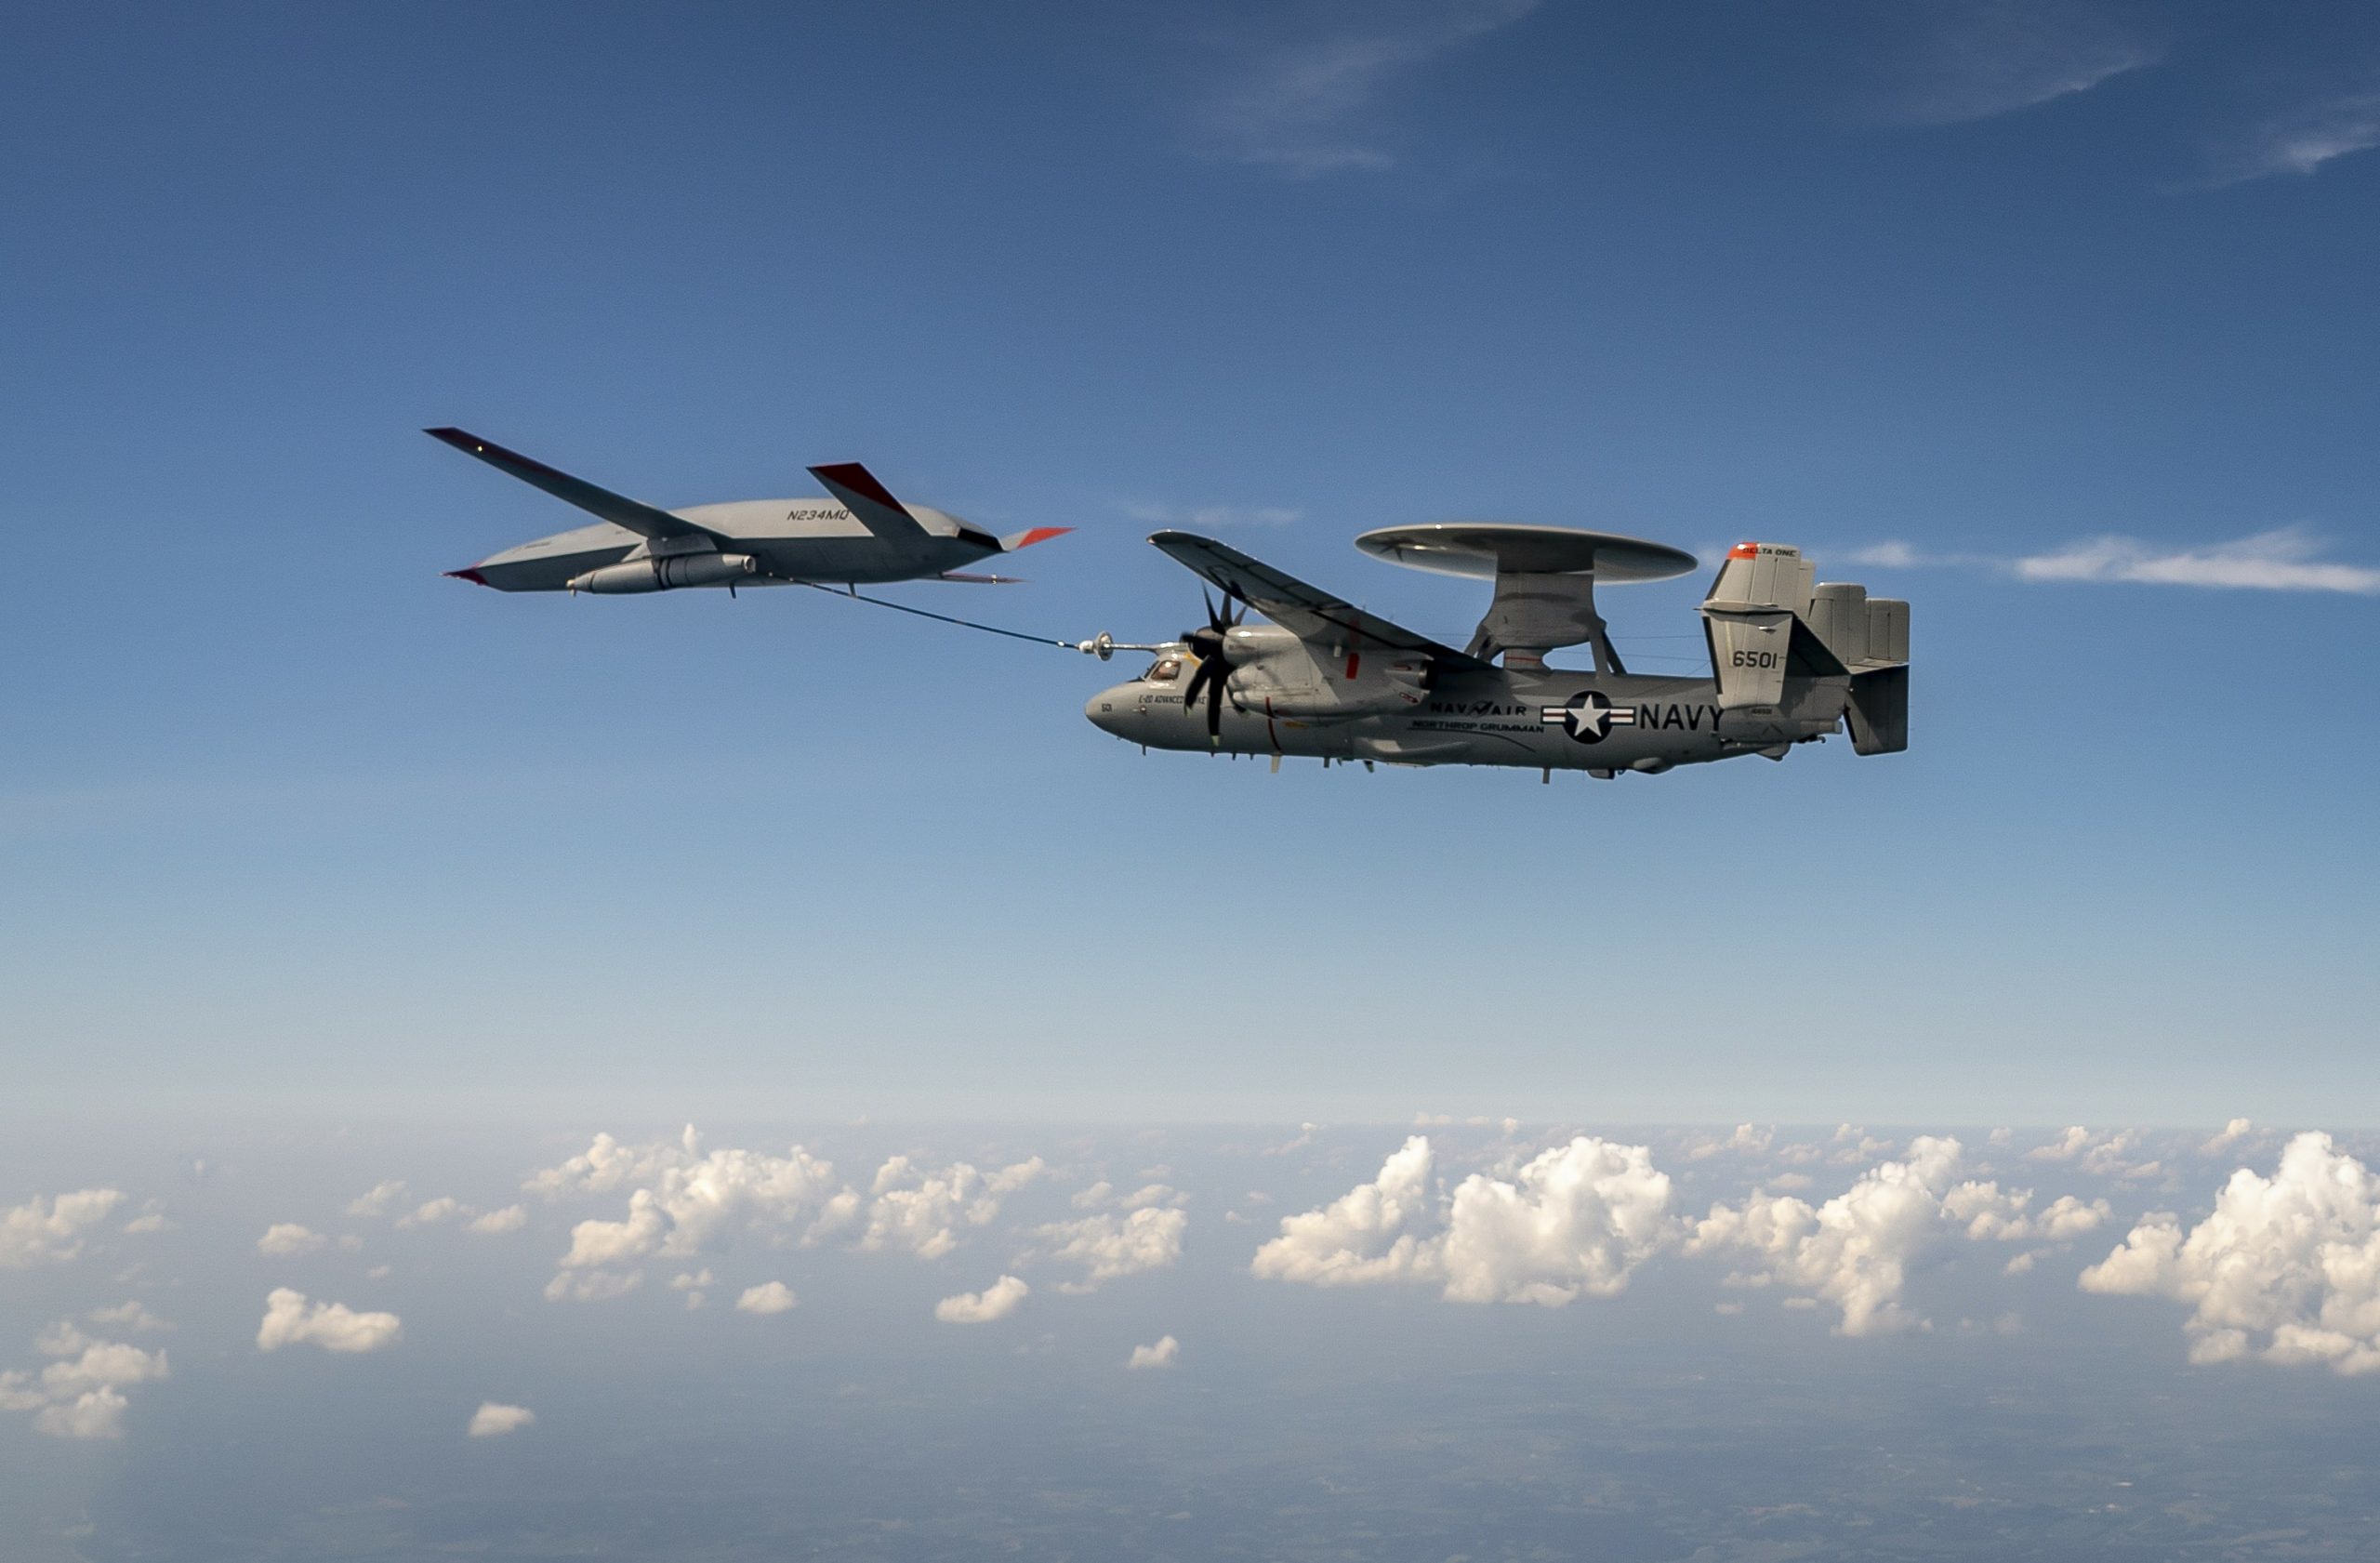 Boeing MQ-25 Drone Completes It’s Second Successful Air-To-Air Refueling With An E-2D